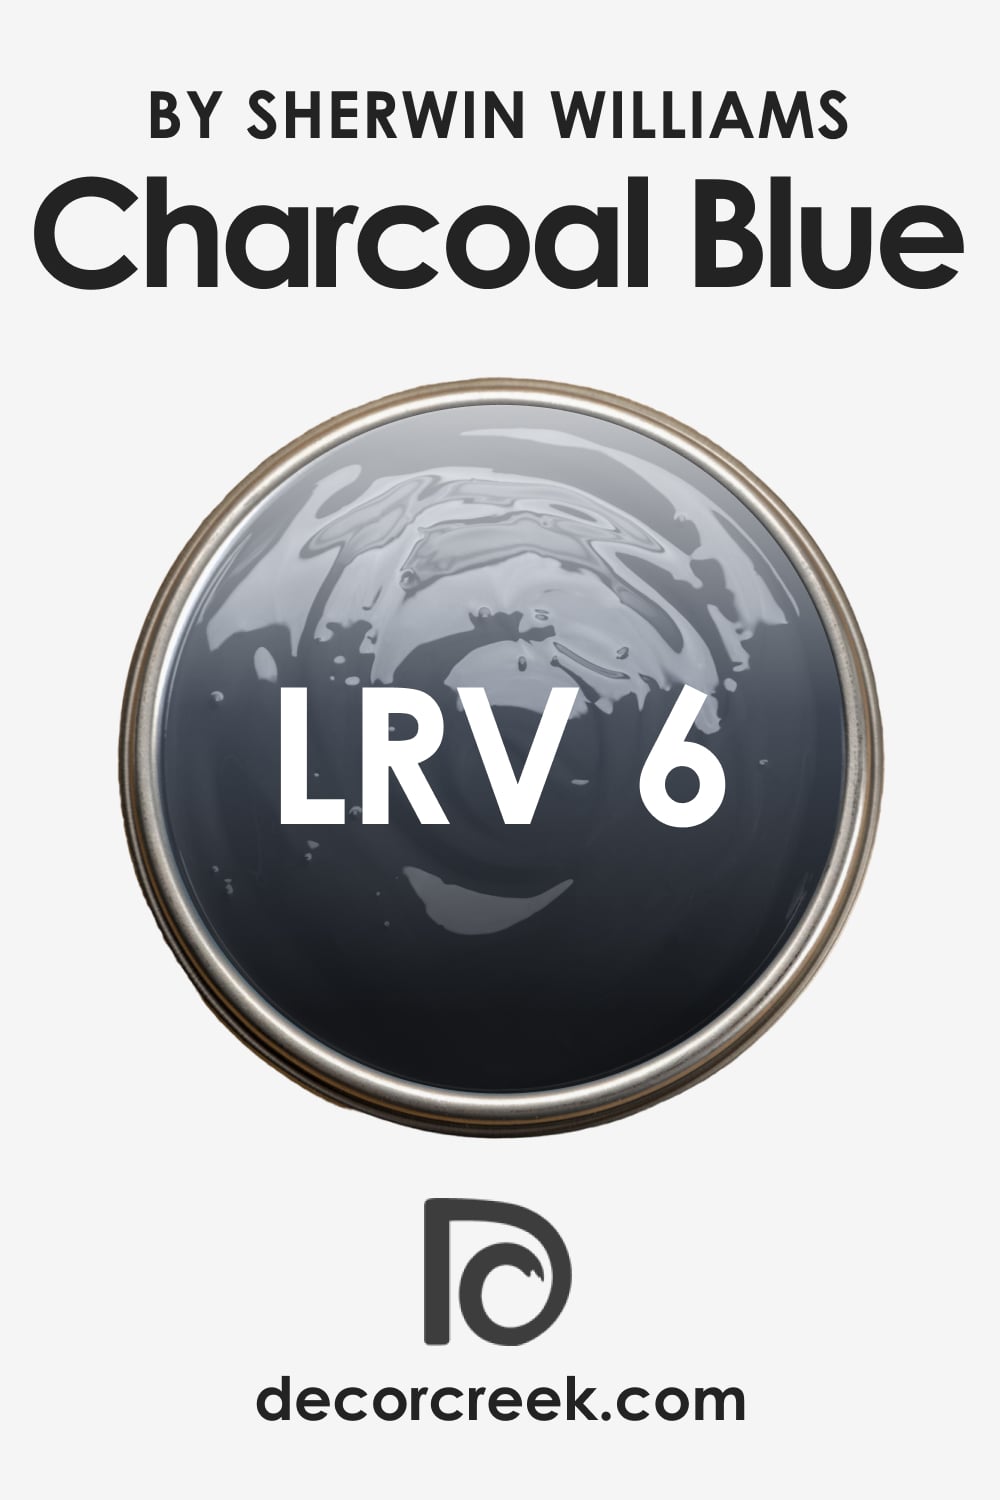 What Is the LRV of This Color?